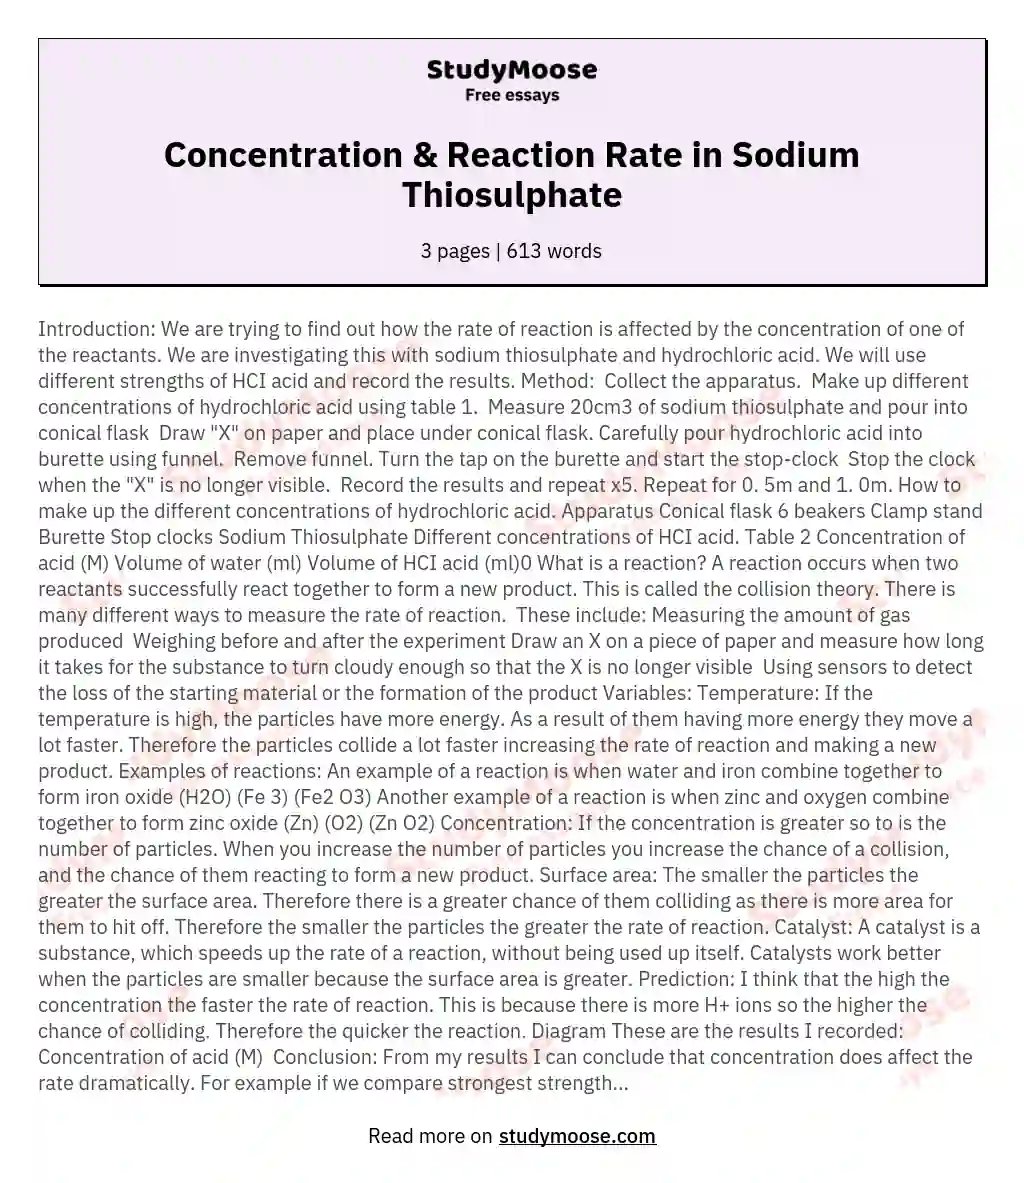 Concentration & Reaction Rate in Sodium Thiosulphate essay